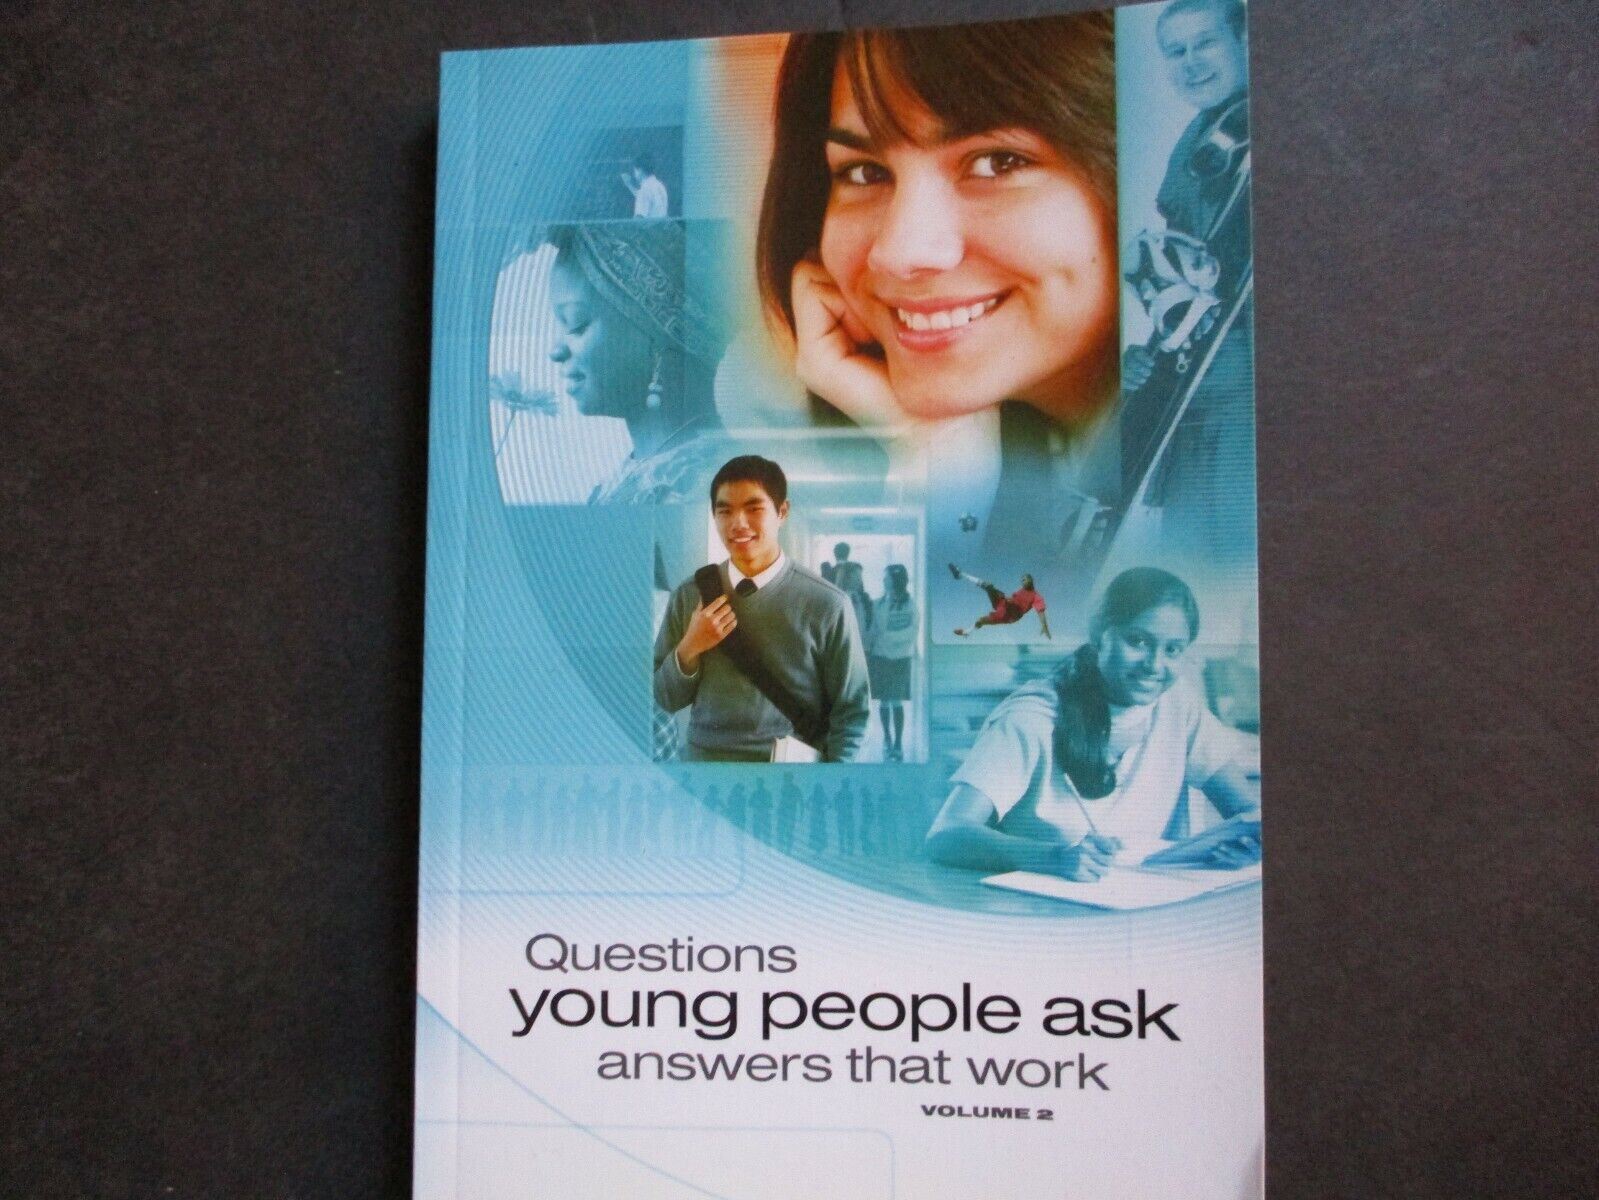 2008 Questions young people ask answers that work book-volume II